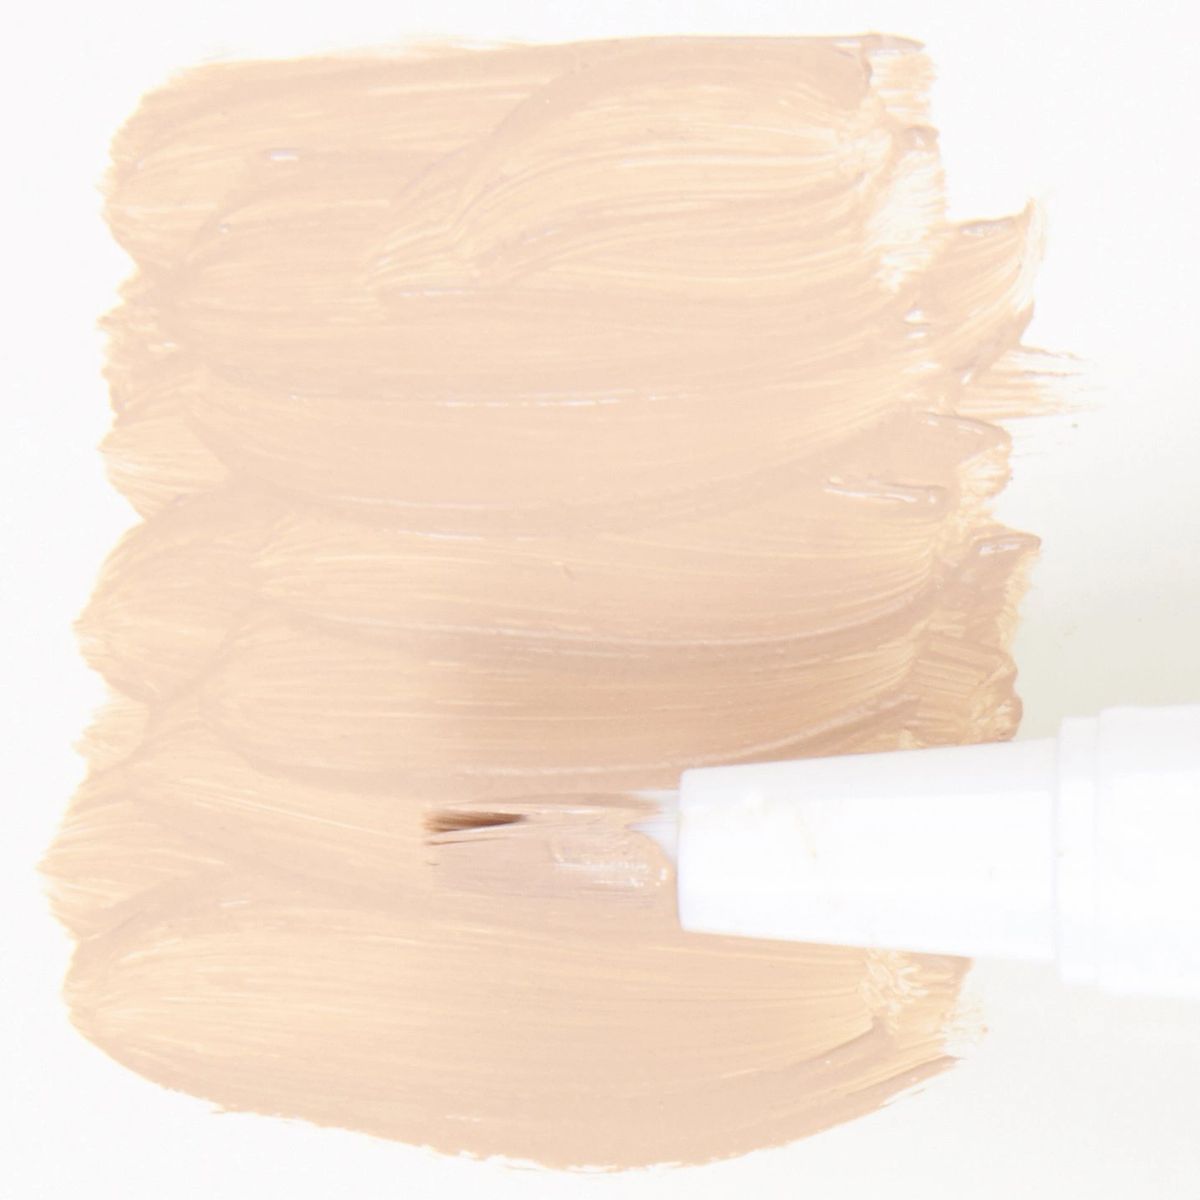 ANTI-AGING MINERAL MYSTIQUE HYDRATING CONCEALER